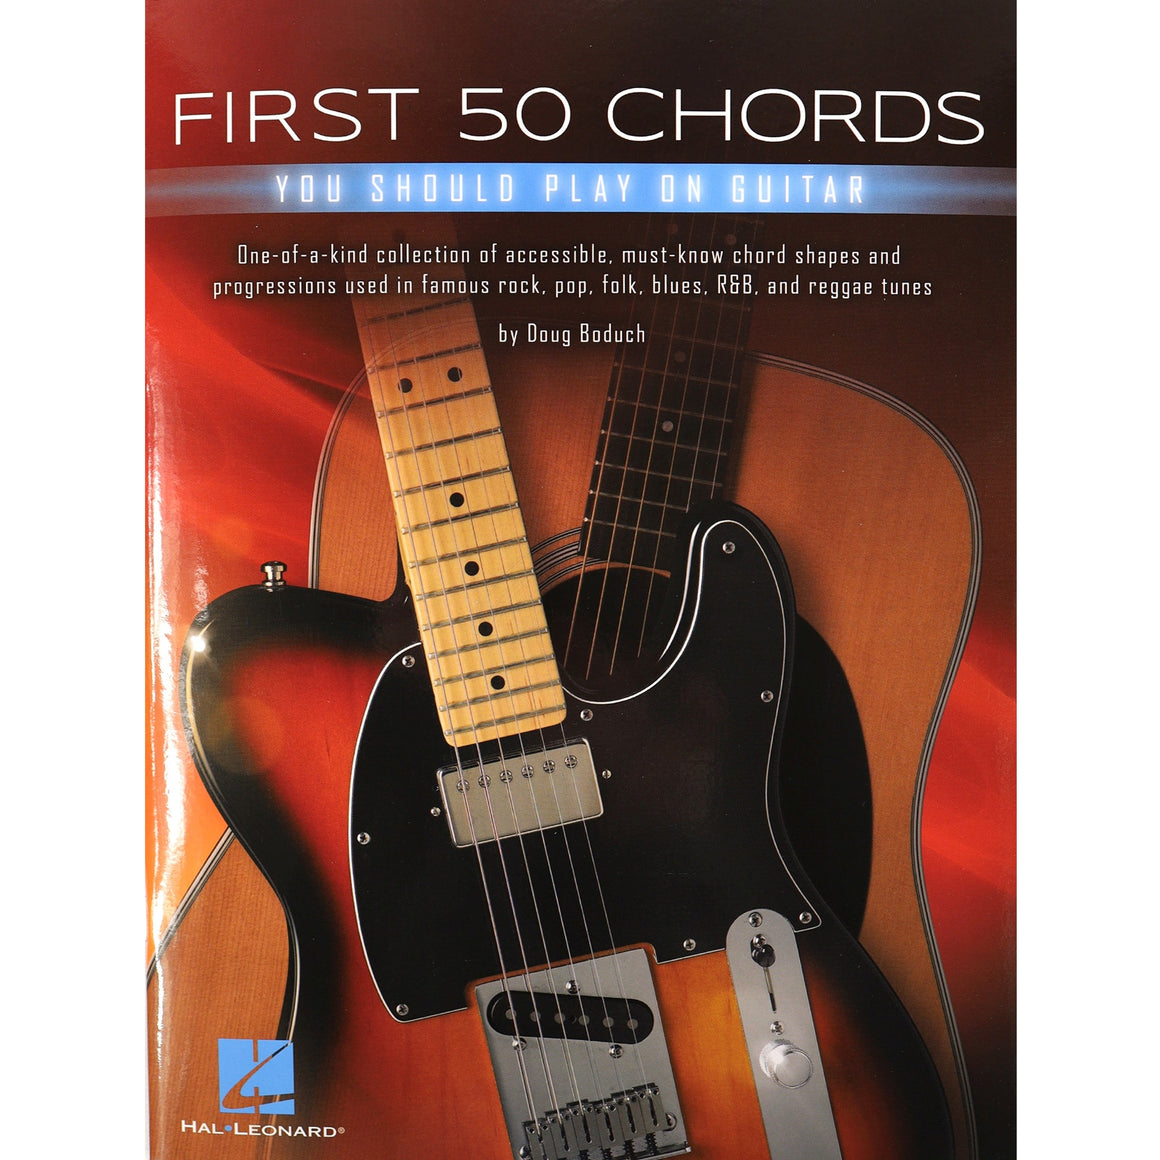 HAL LEONARD 300255 First 50 Chords You Should Play on Guitar